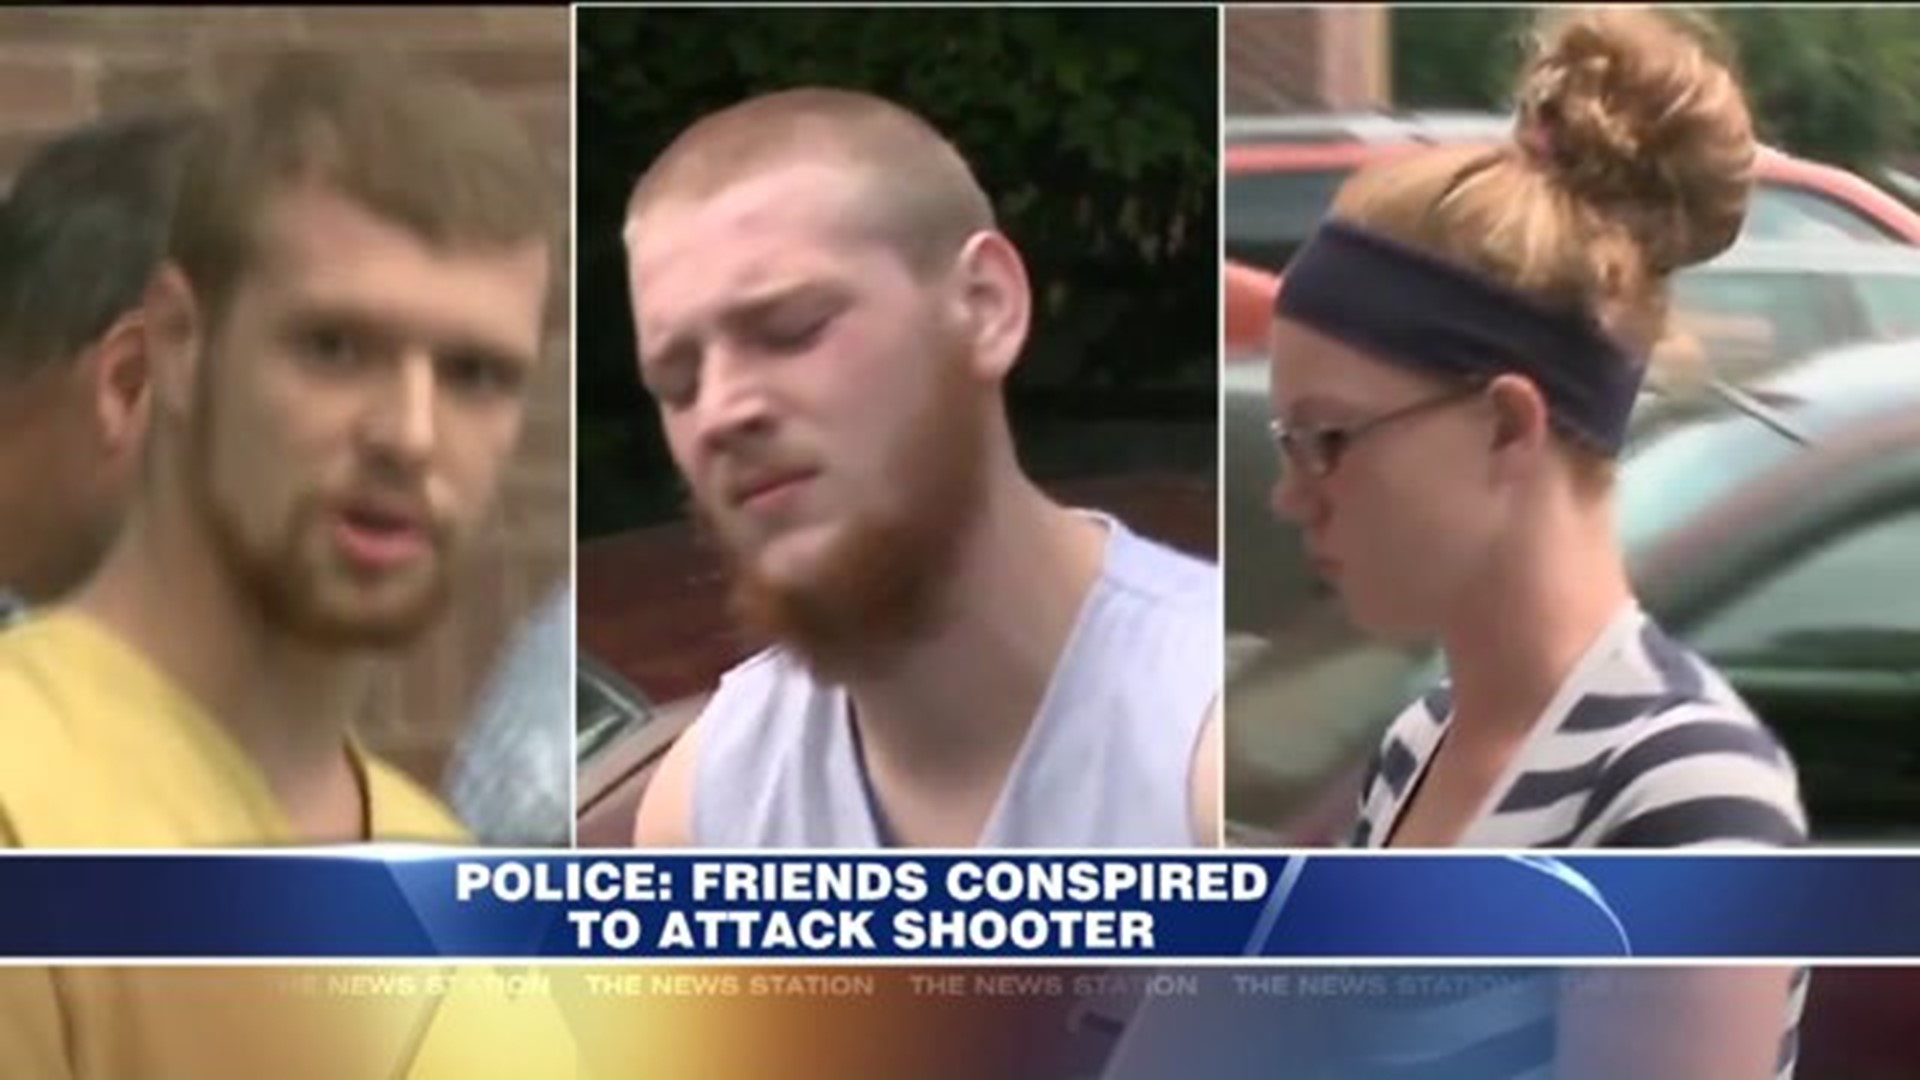 Police: Friends Conspired to Attack Shooter